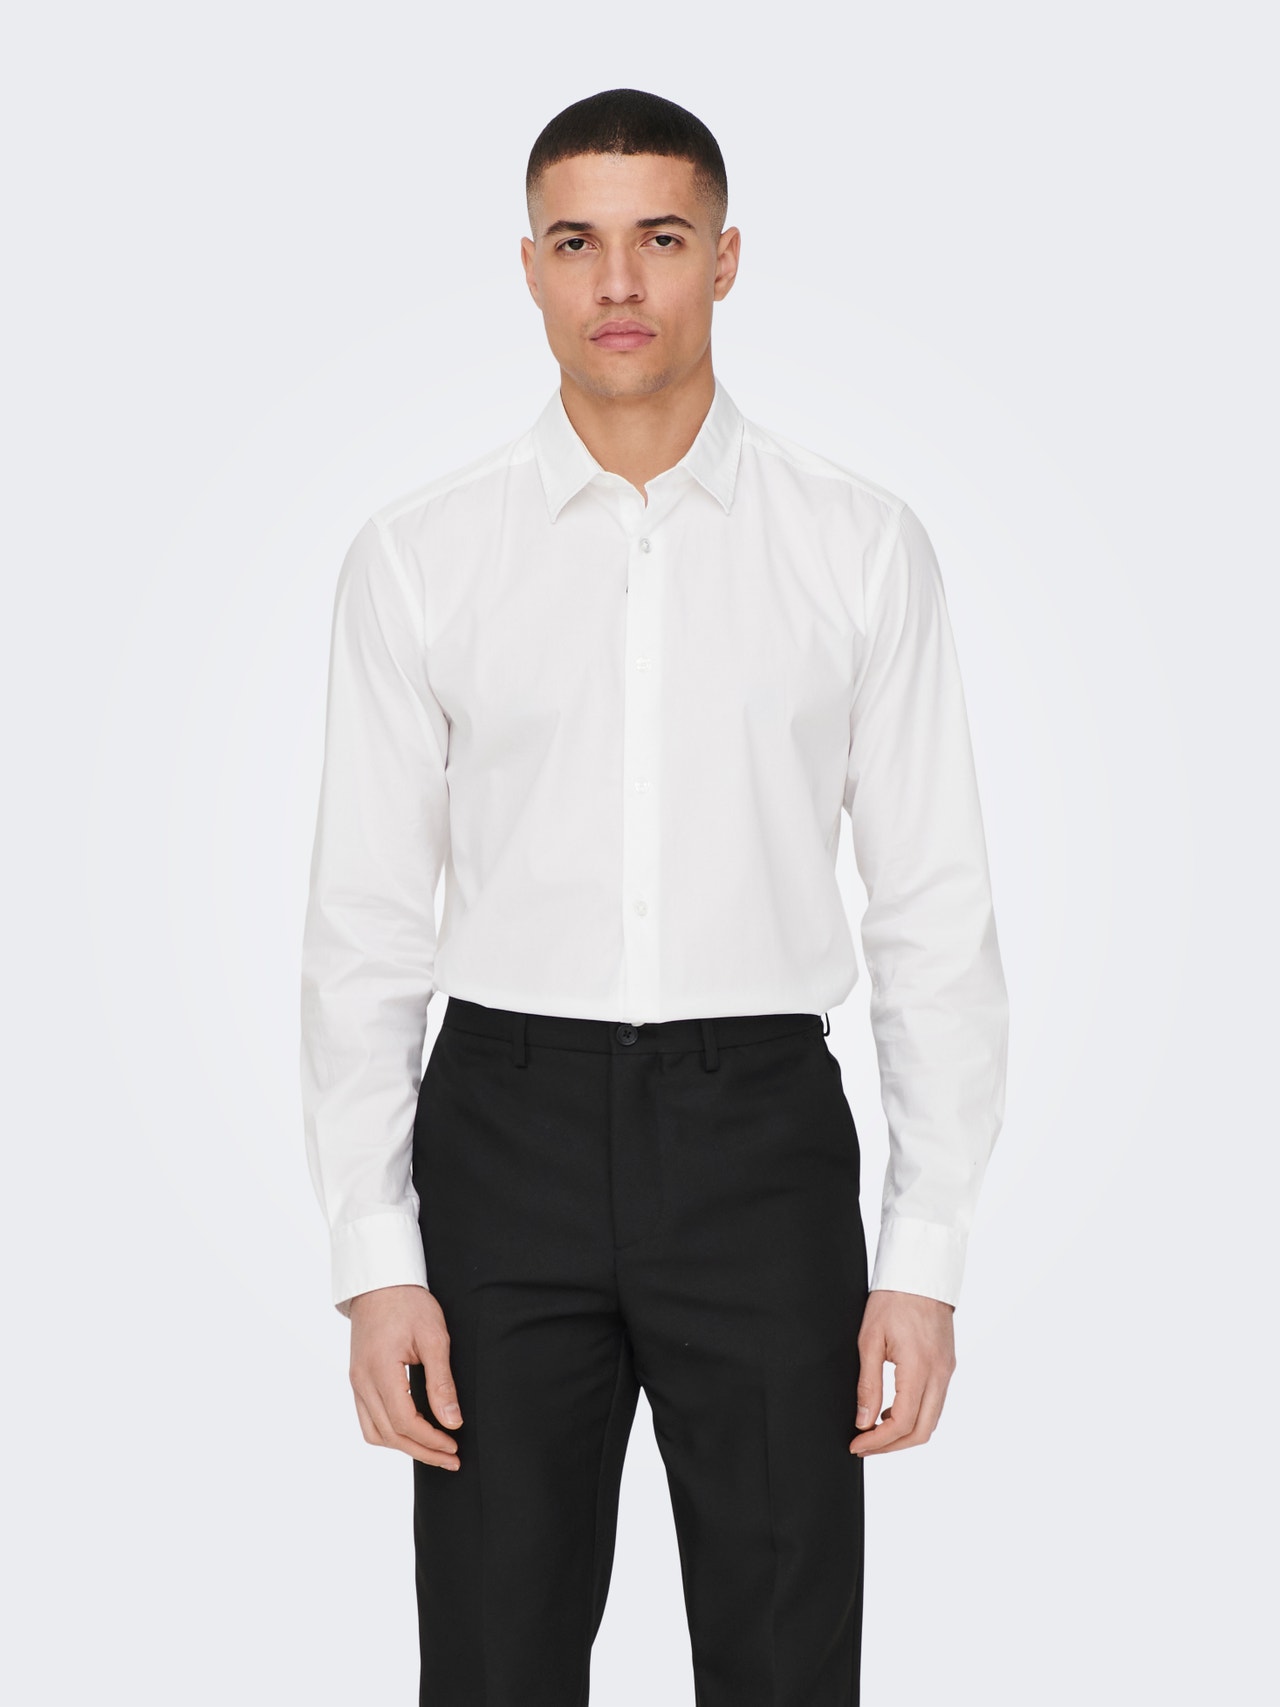 ONLY & SONS Slim Fit Shirt collar Shirt -White - 22026000